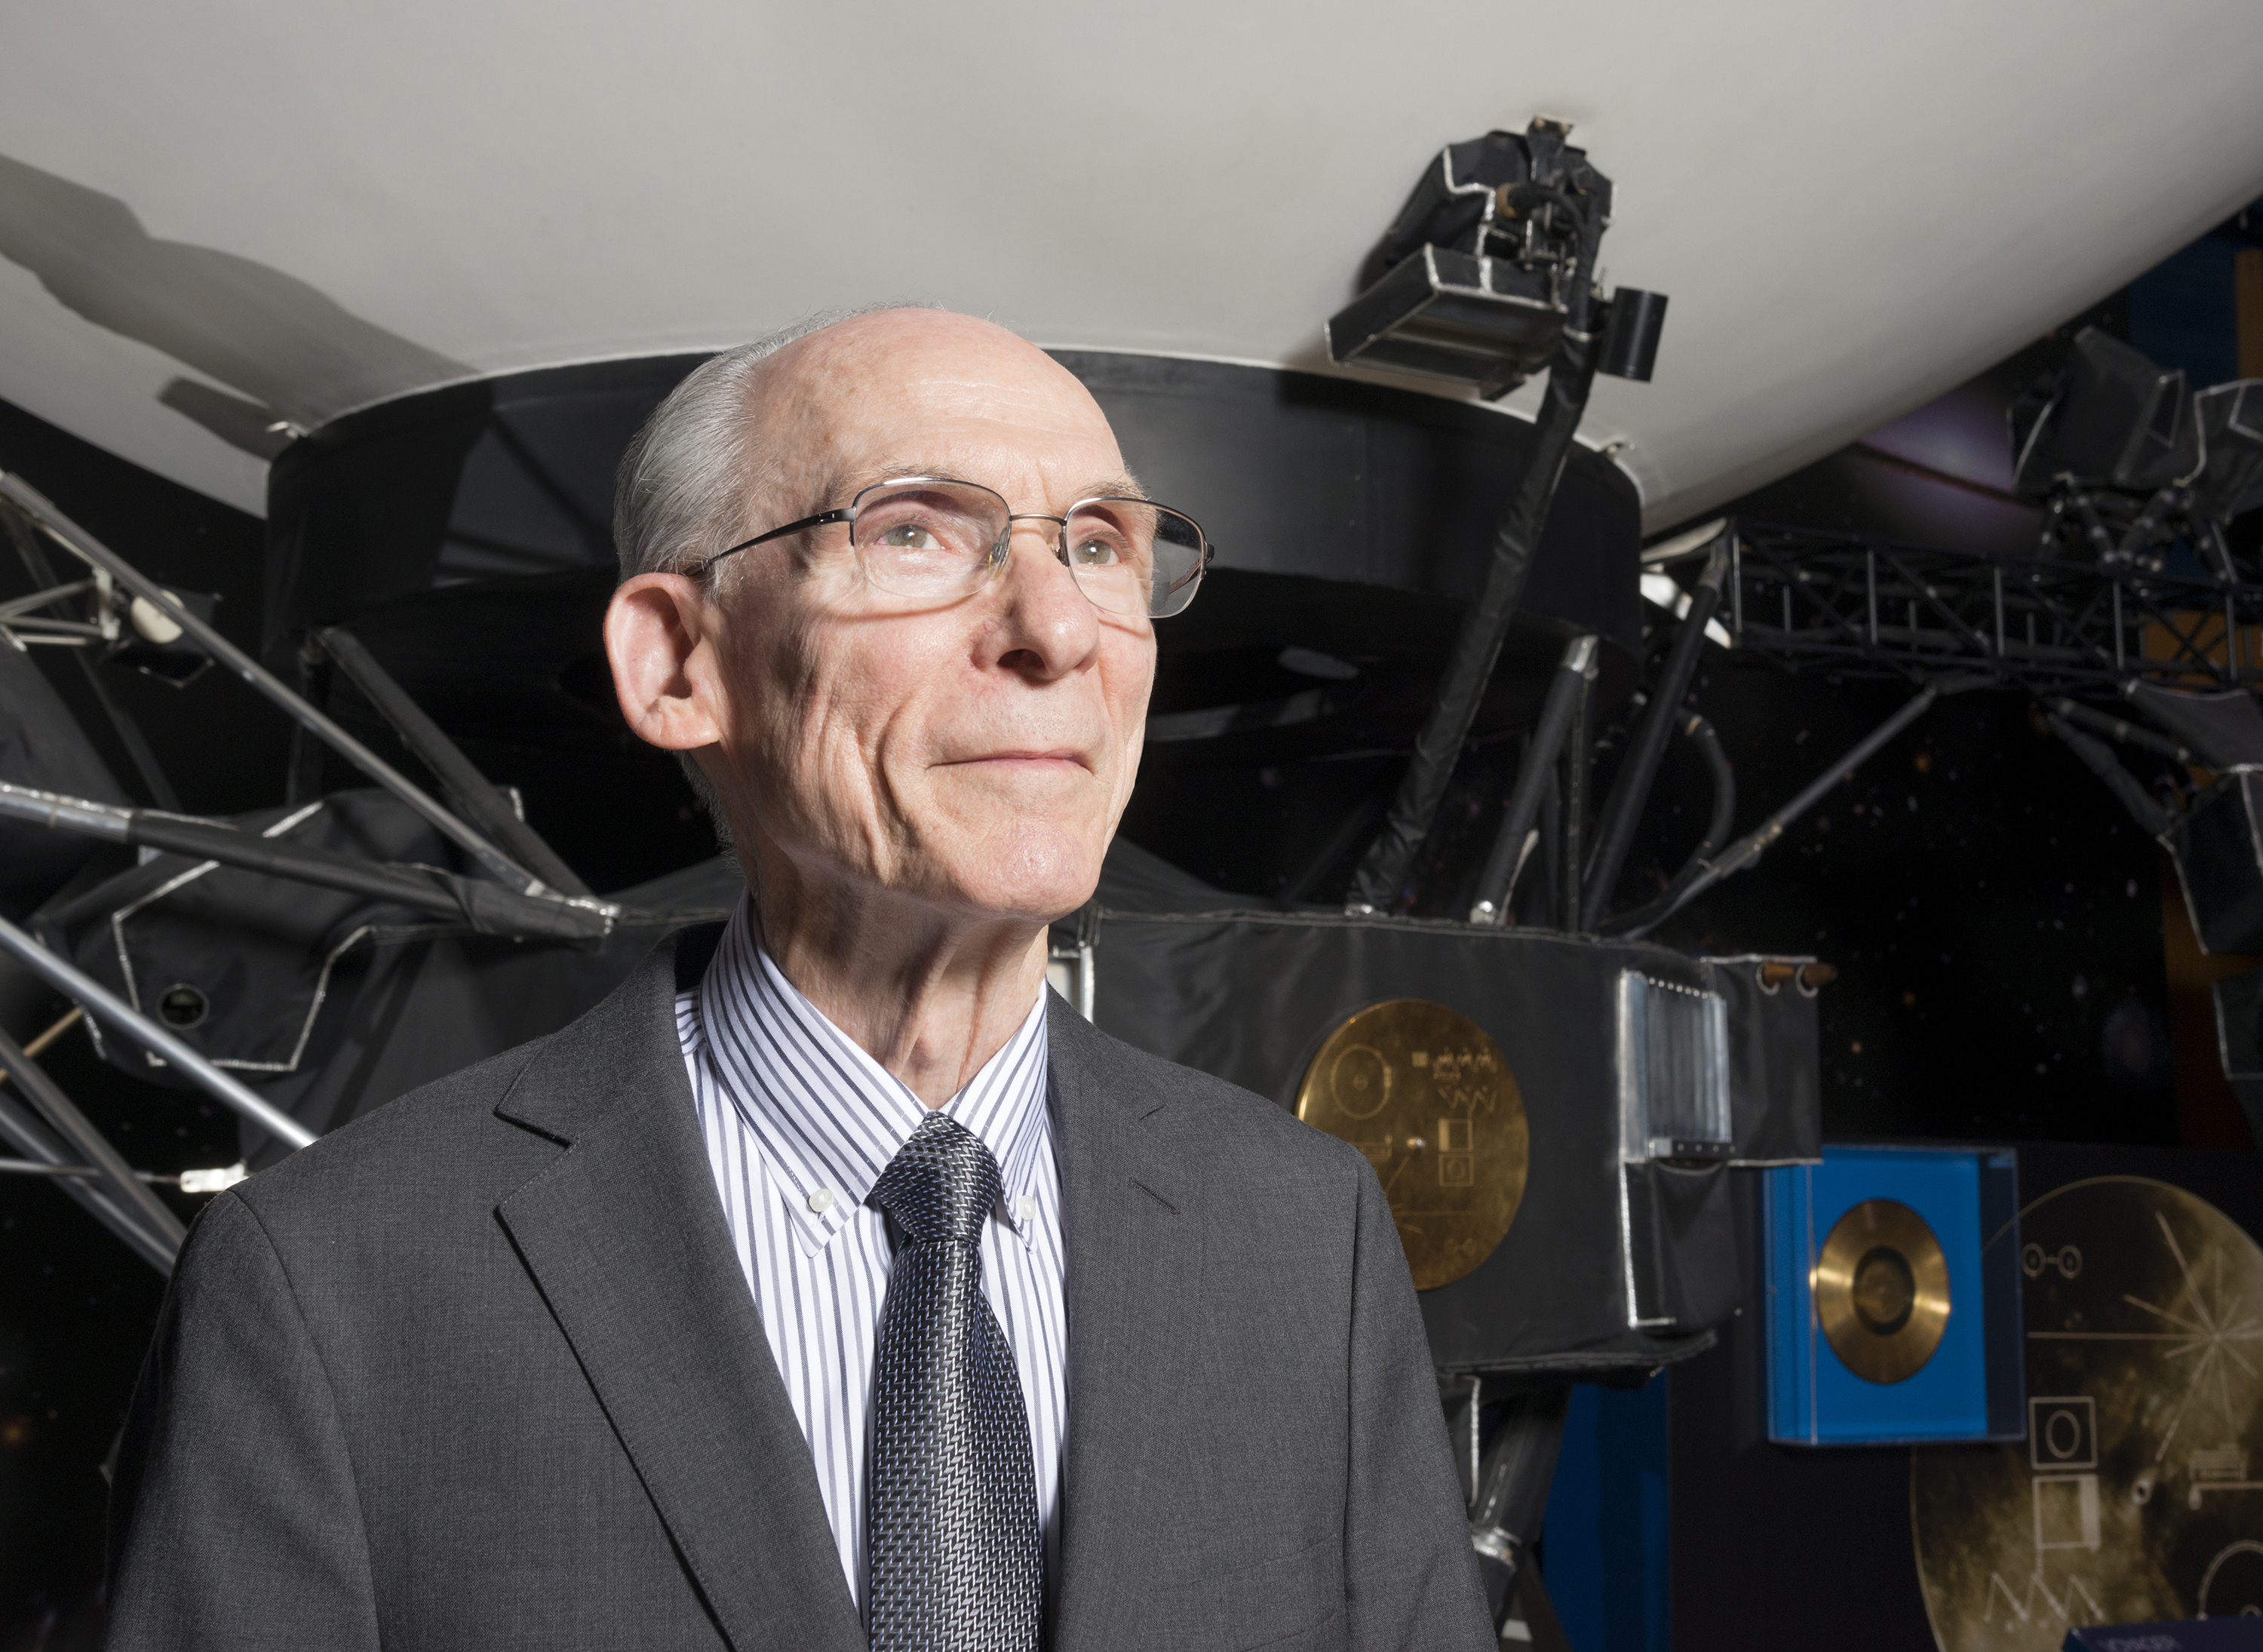 An older man in a coat and tie is standing in front of a full-size Voyager spacecraft model.